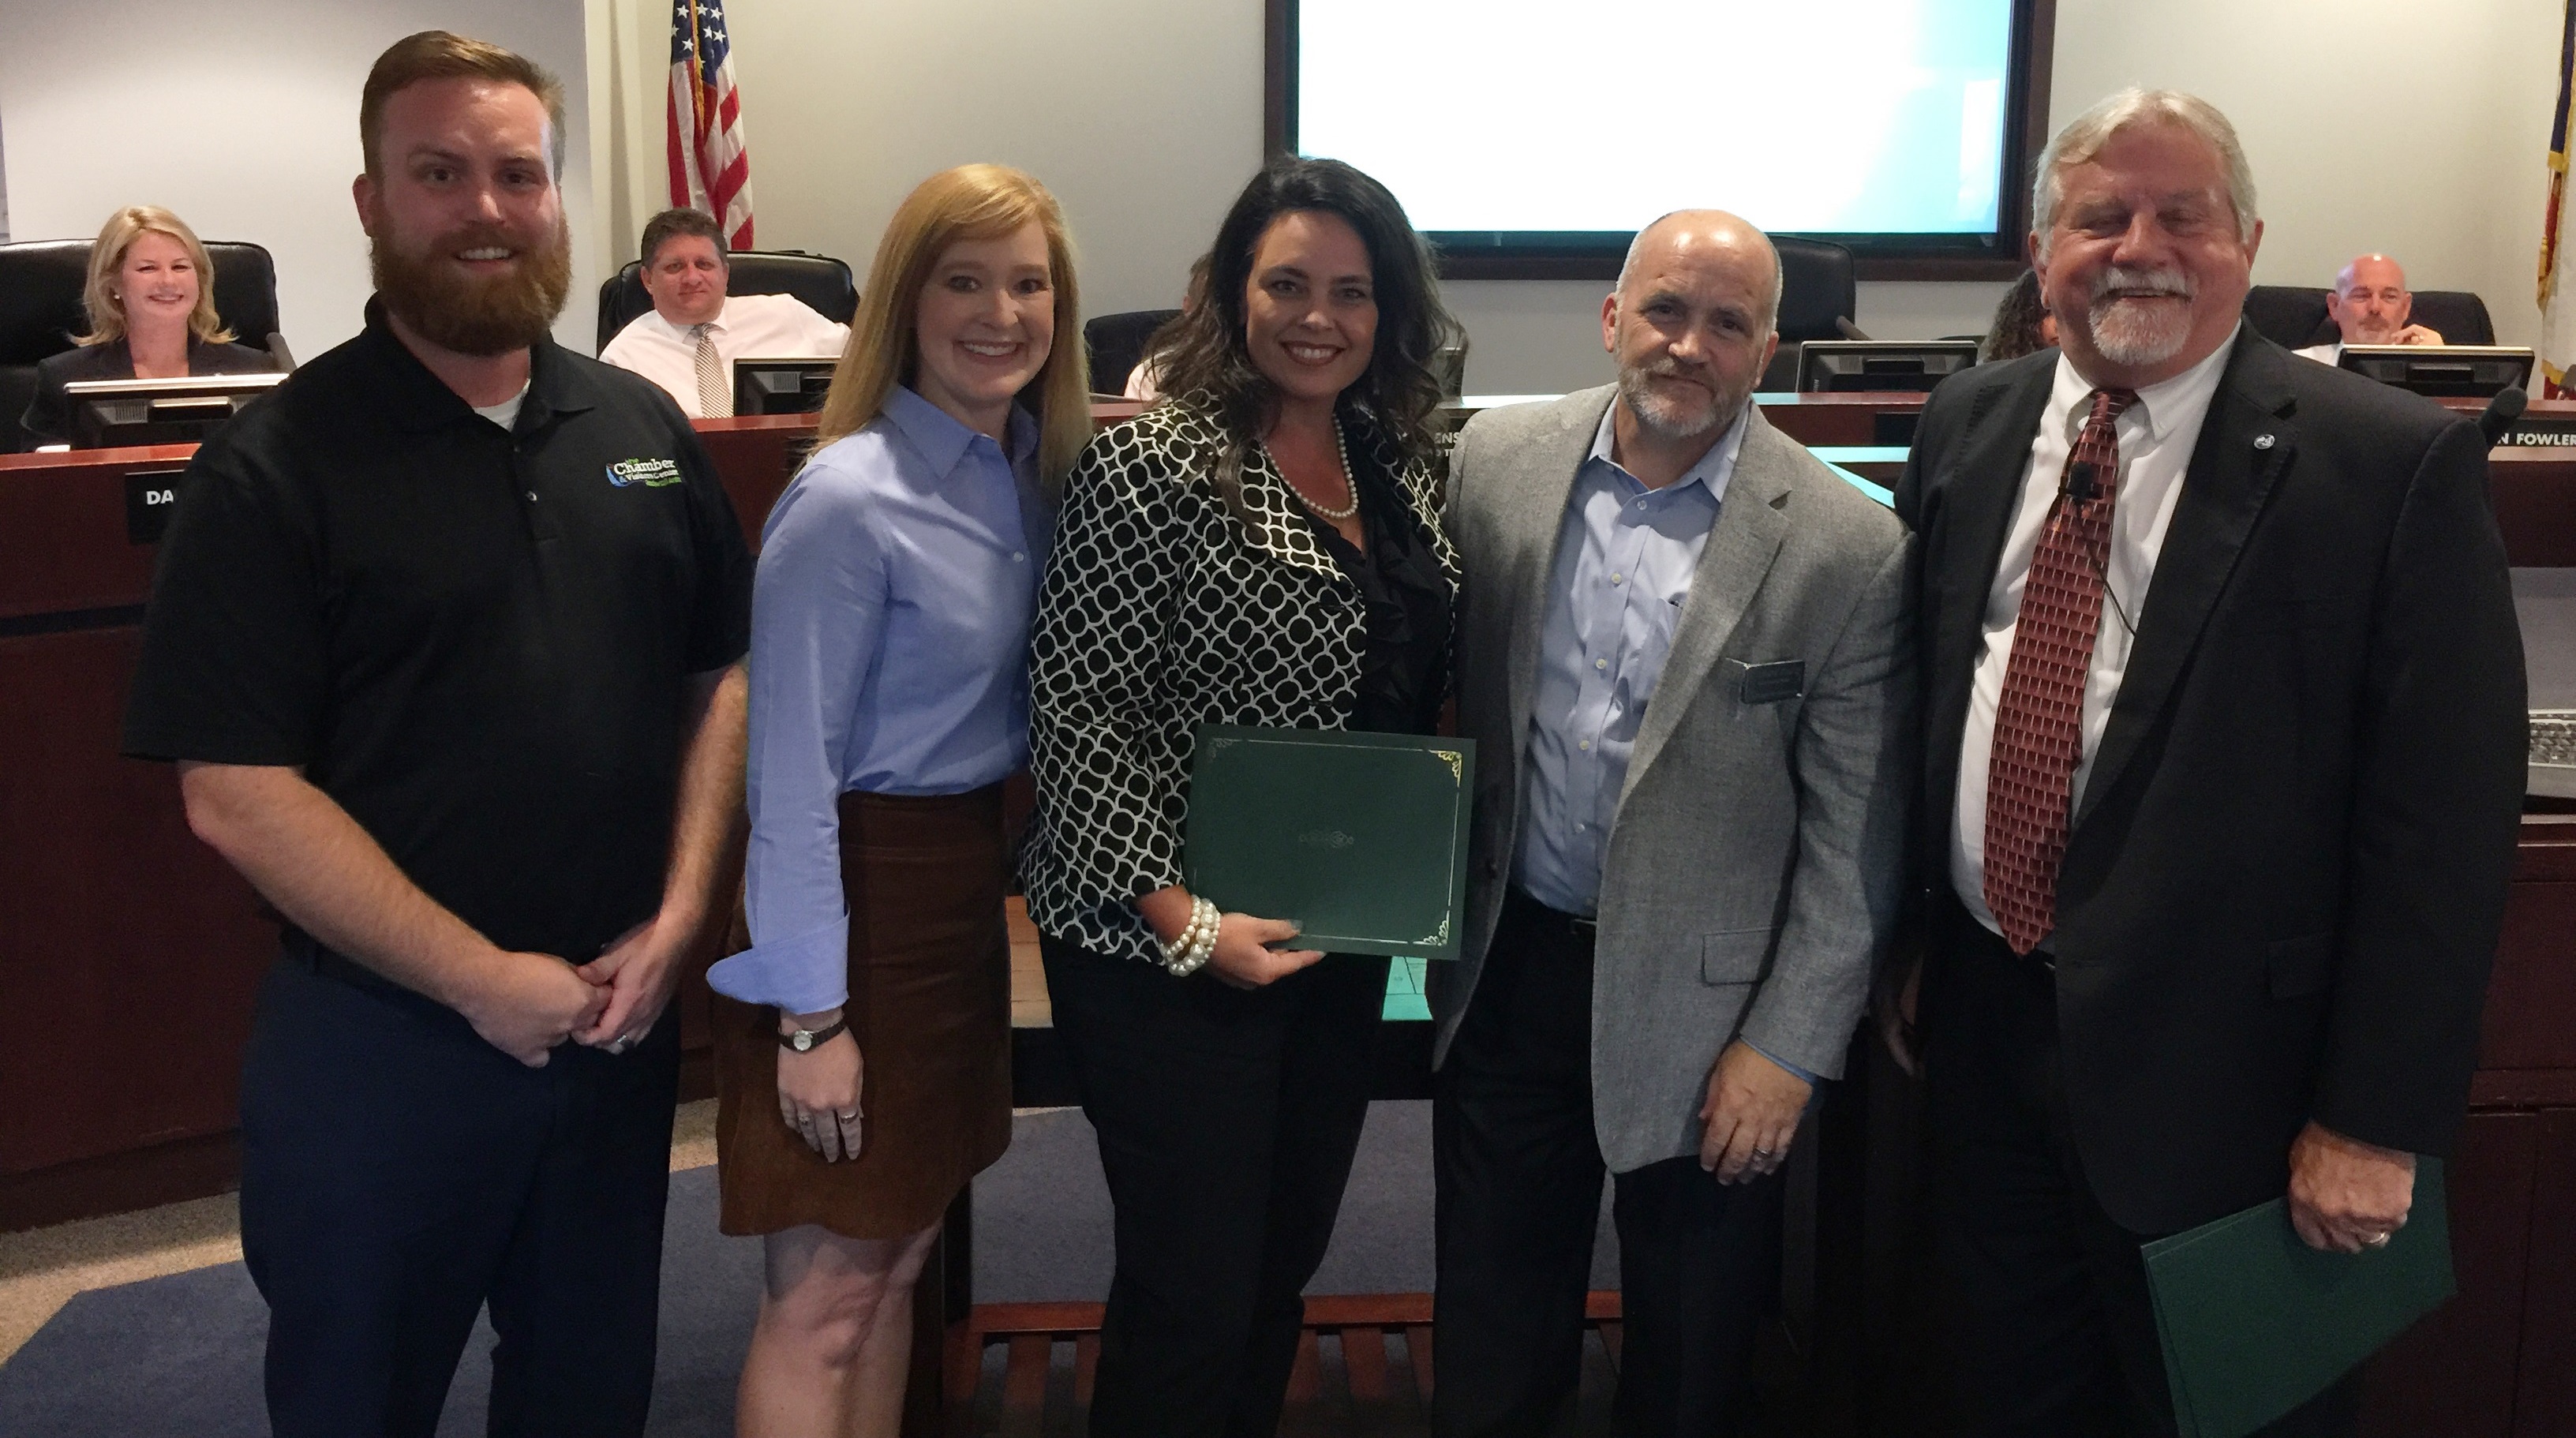 Mayor proclaims Oct 16-20 Chamber of Commerce Week in City of Rockwall